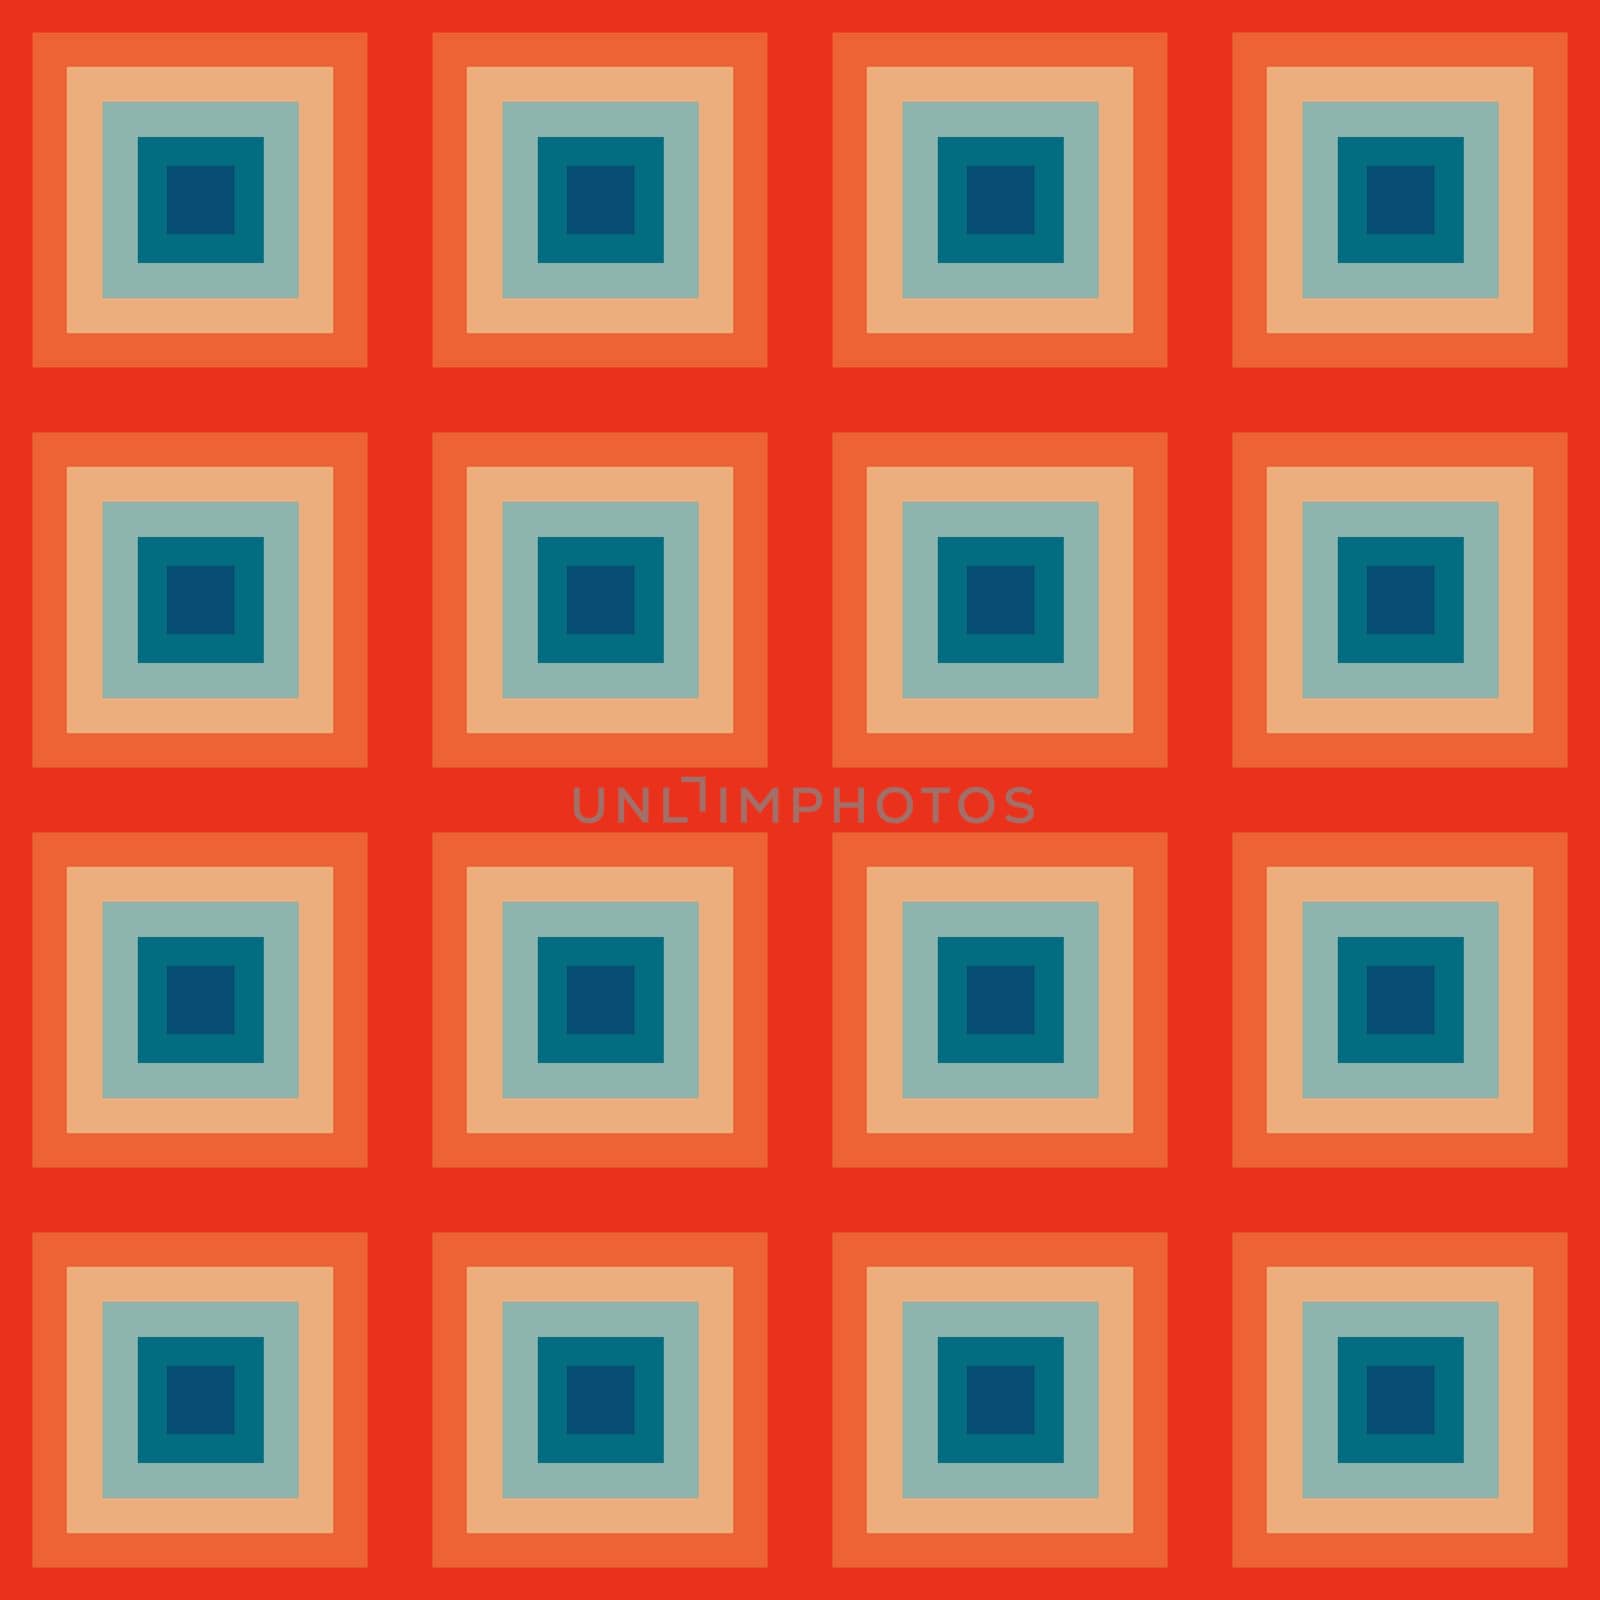 Vintage aestethic pattern with squares in the style of the 70s and 60 by Dustick